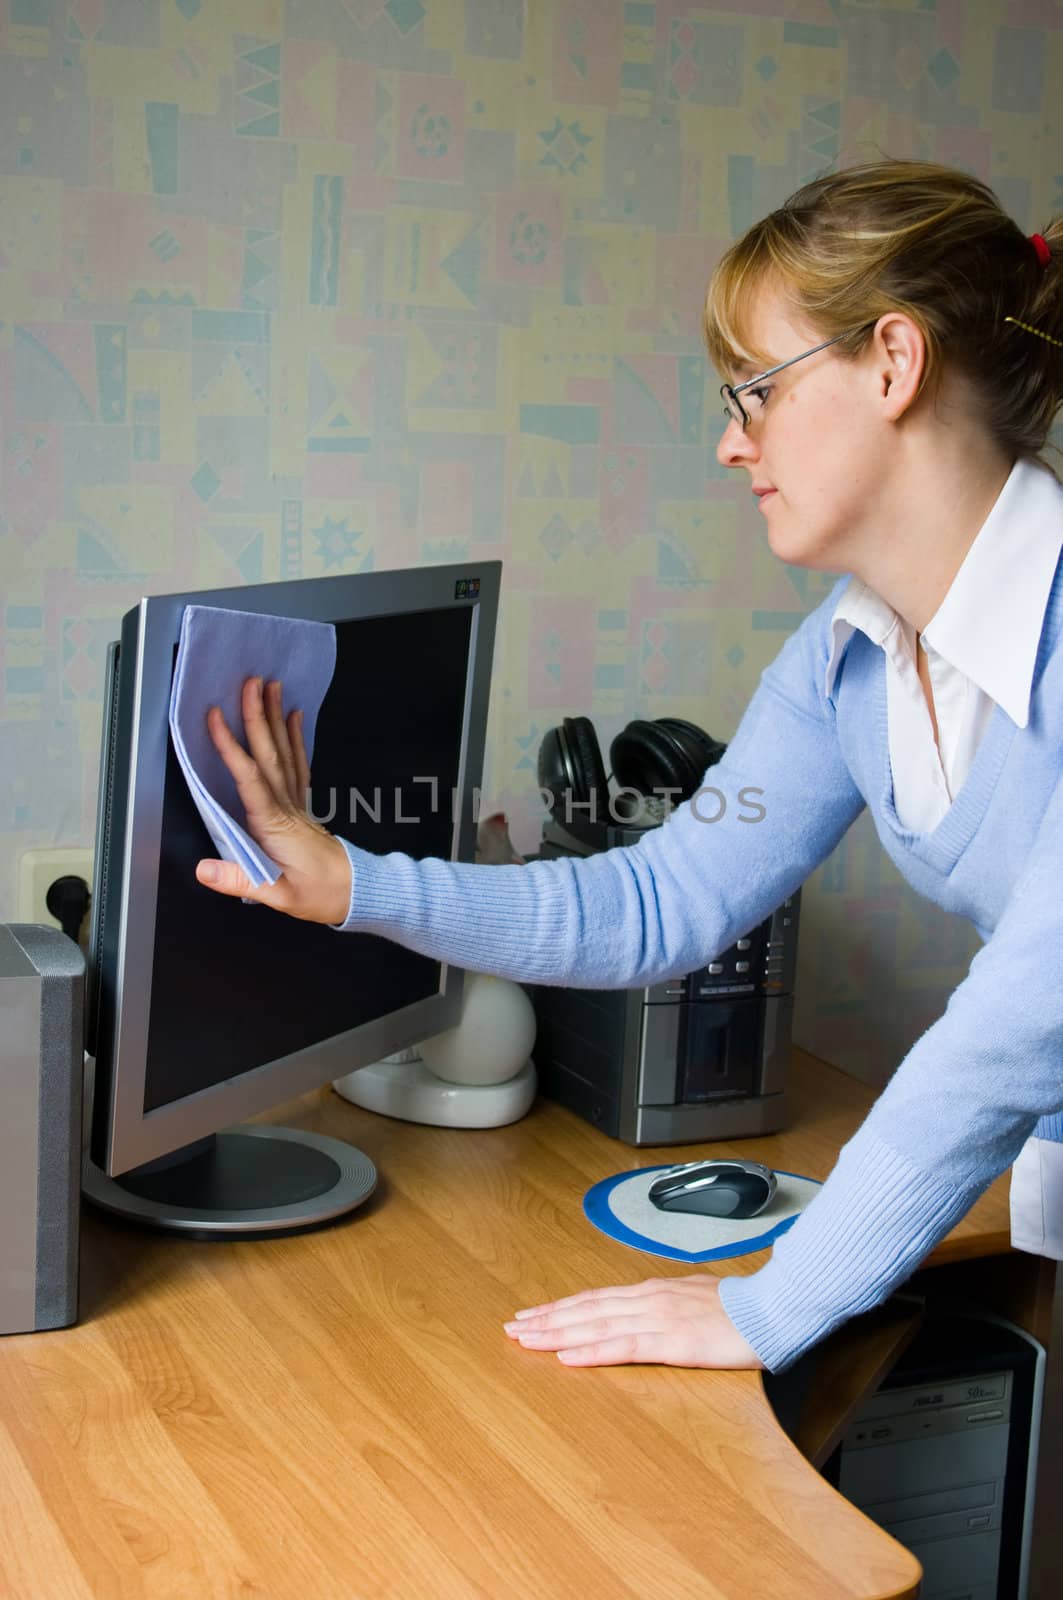 The image of the girl wiping the monitor